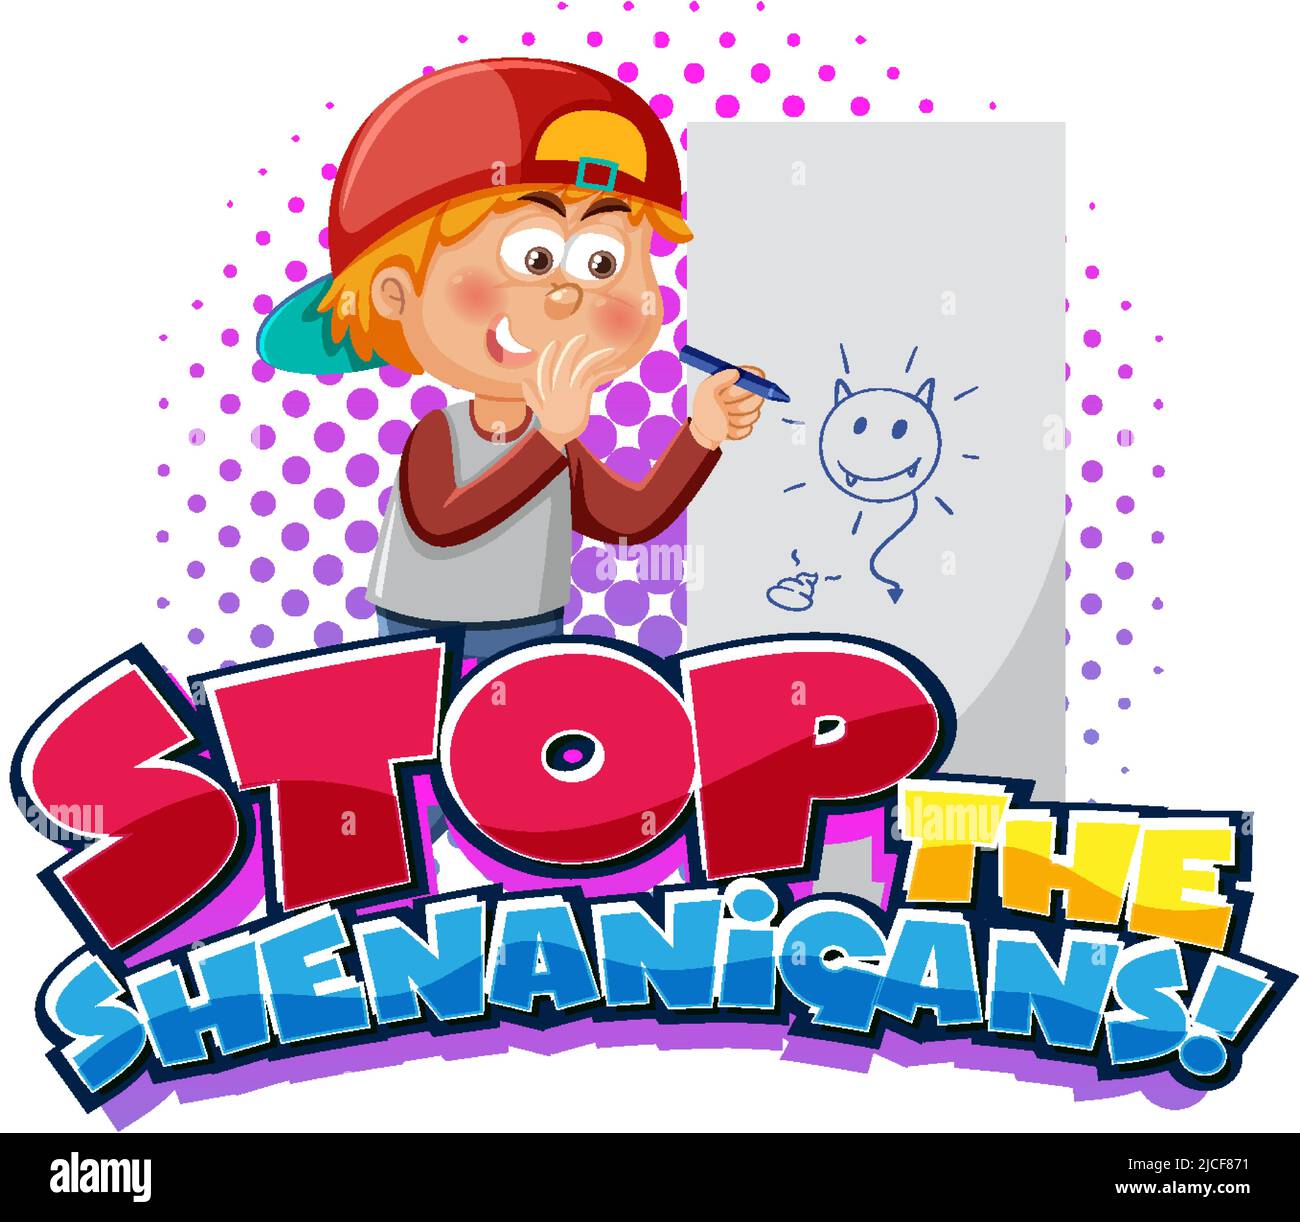 Stop the shenanigans Cut Out Stock Images & Pictures - Alamy